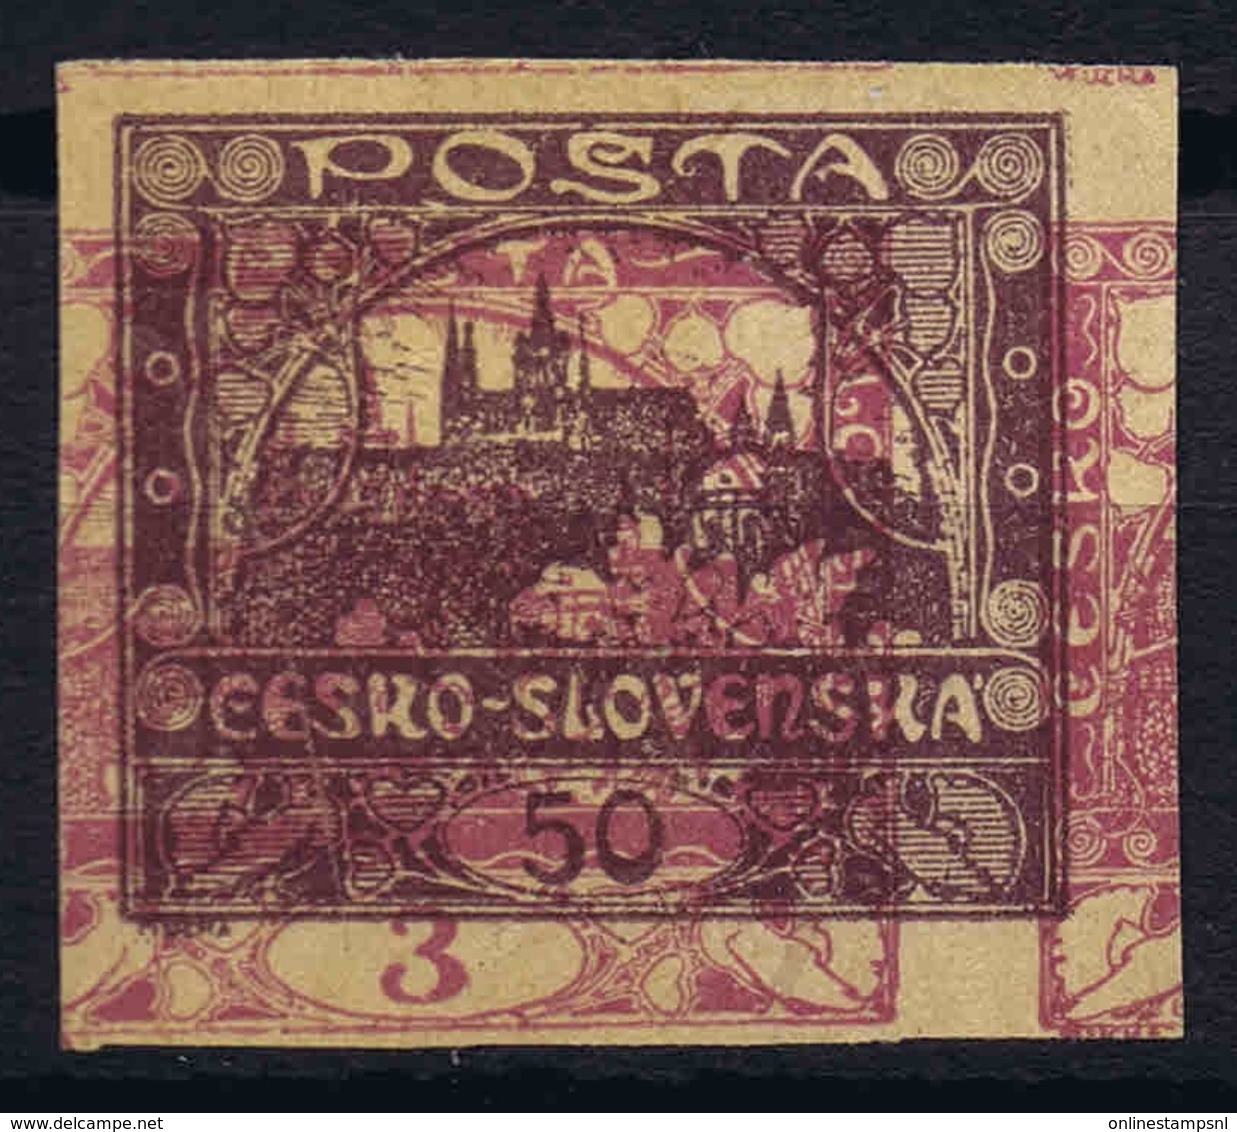 Czechoslovakia  collection of 29 early issues (Hradschin), misprints proofs etc all items scanned also separated